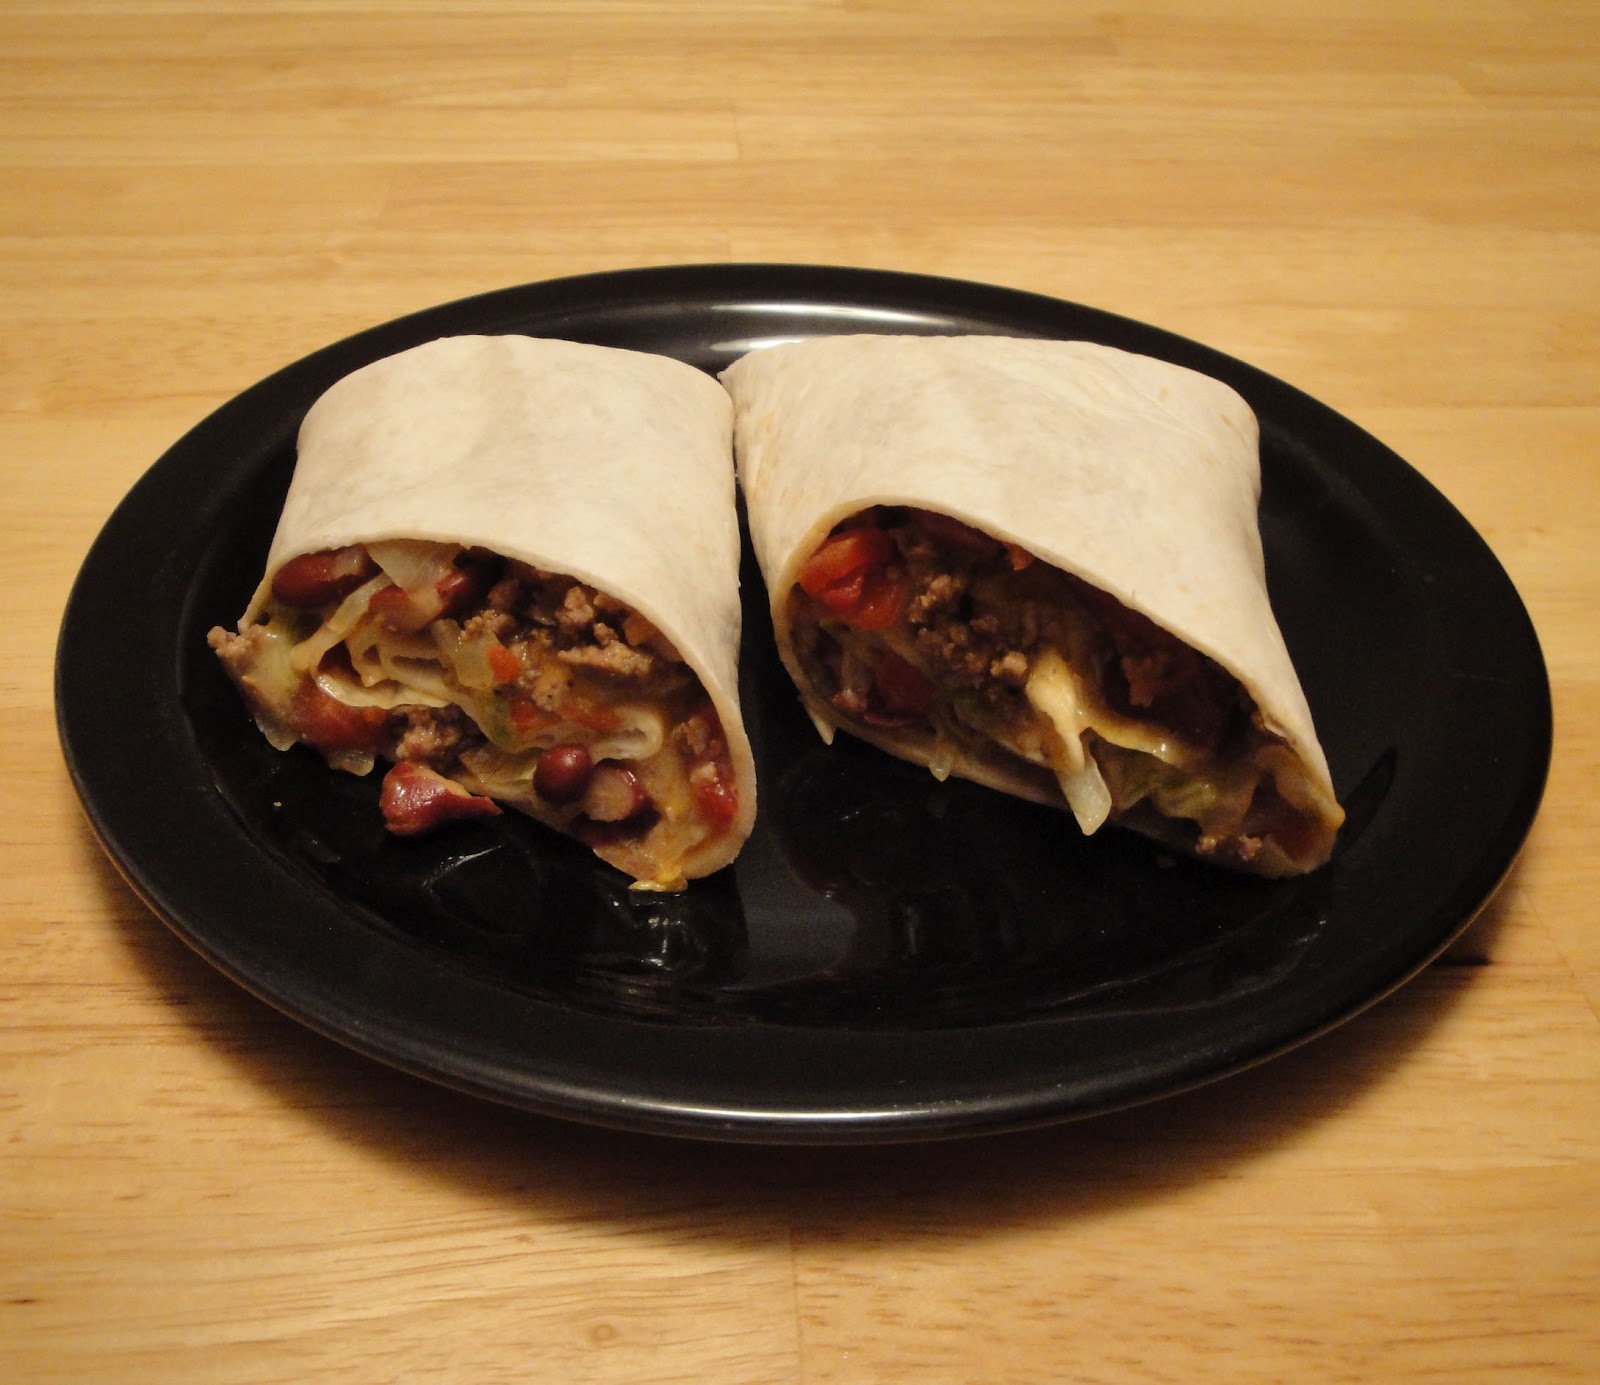 Chipotle Beef And Bean Burritos